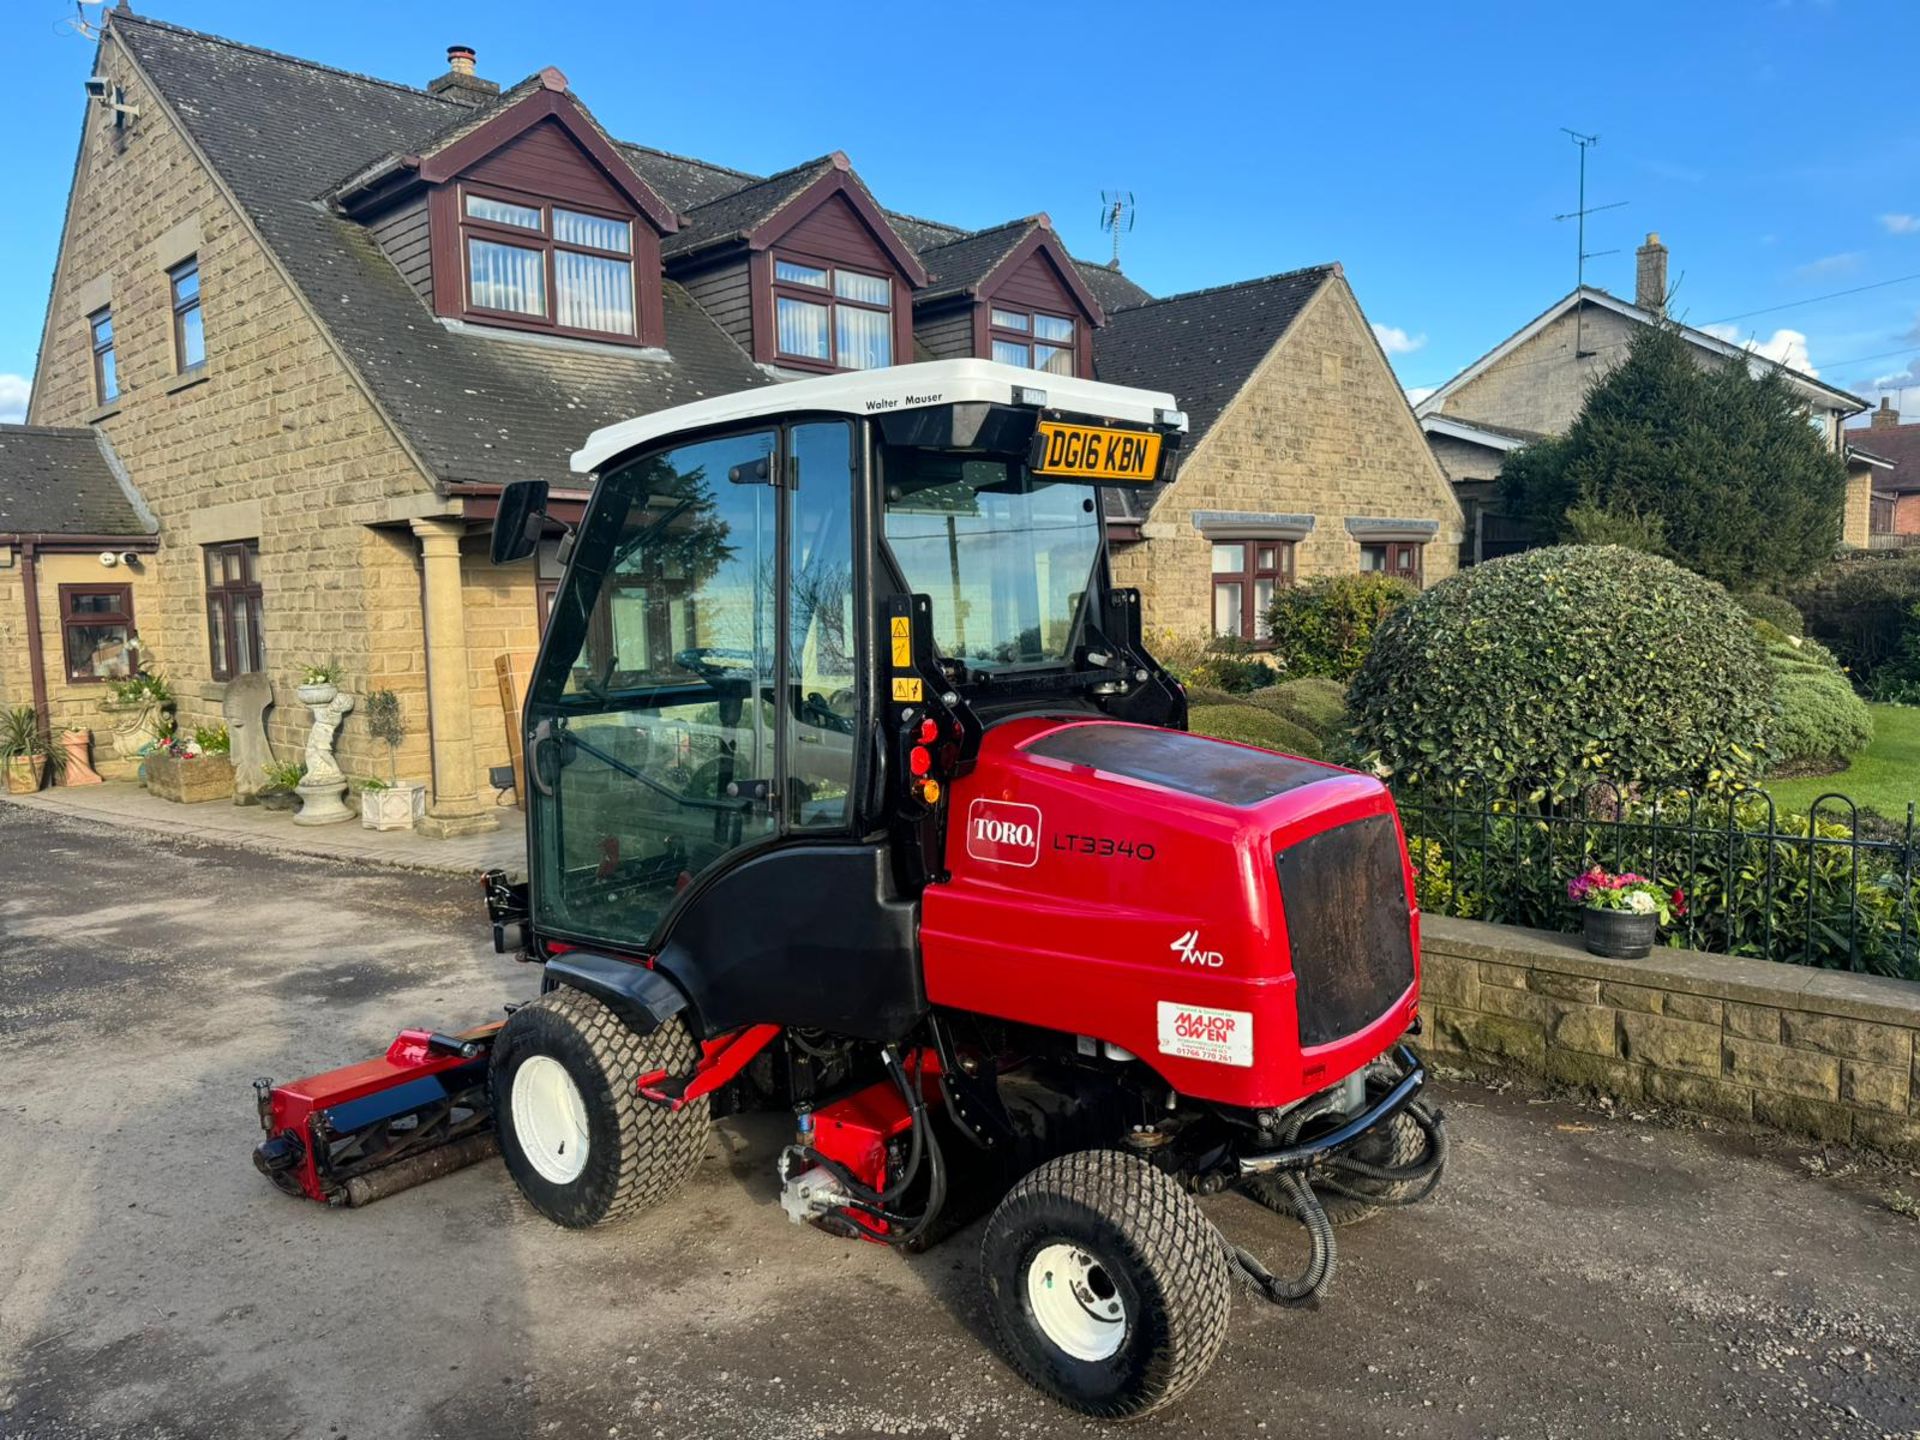 2016 TORO LT3340 4WD 3 GANG RIDE ON CYLINDER MOWER WITH CAB AND AIR CON *PLUS VAT* - Image 8 of 19